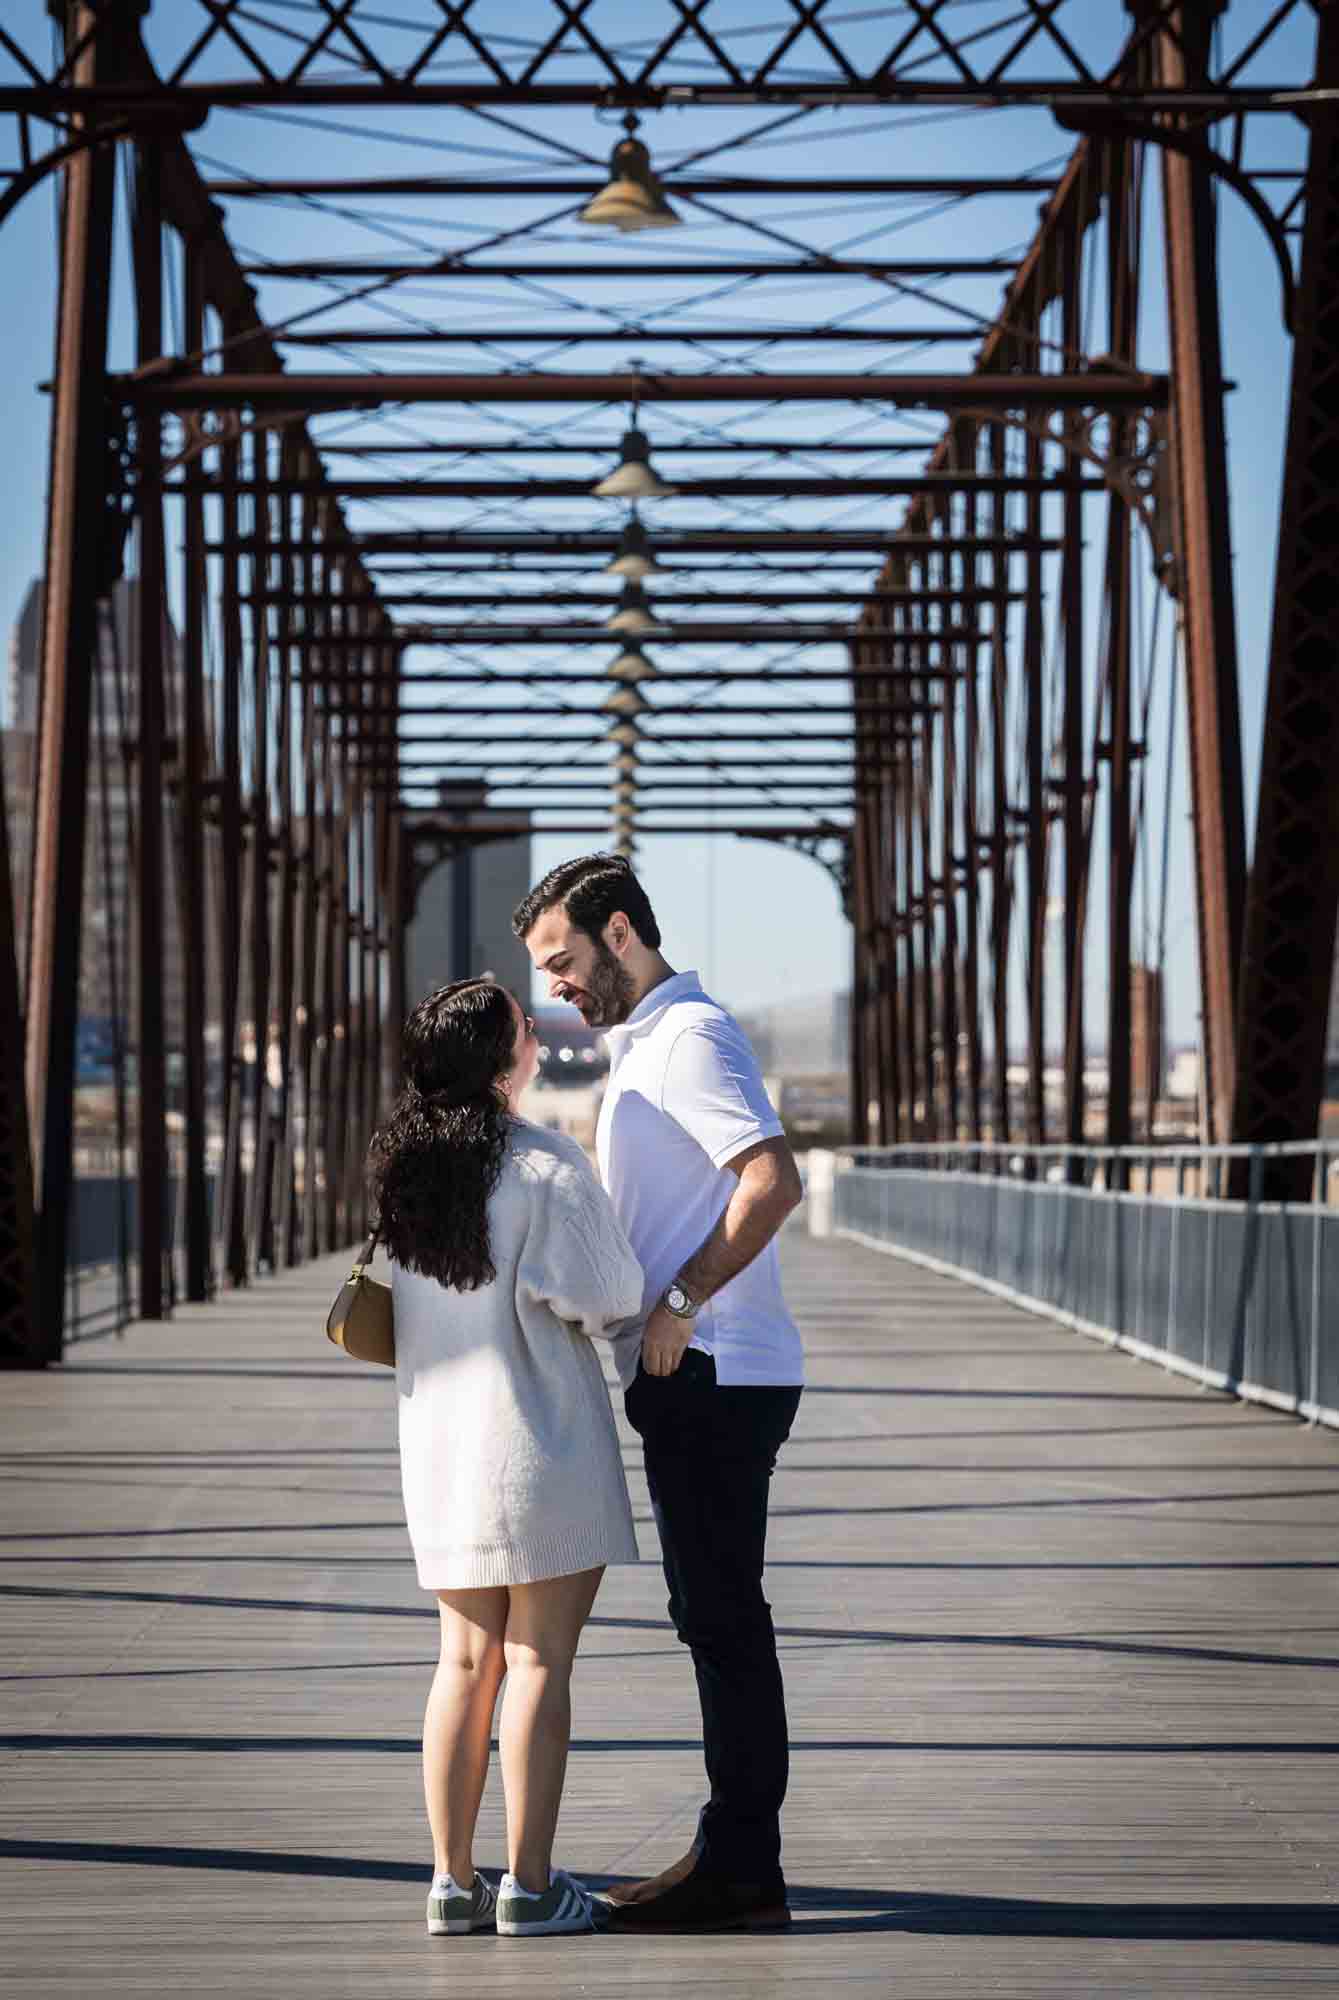 Man pulling box out of pocket in front of woman for a Hays Street Bridge proposal